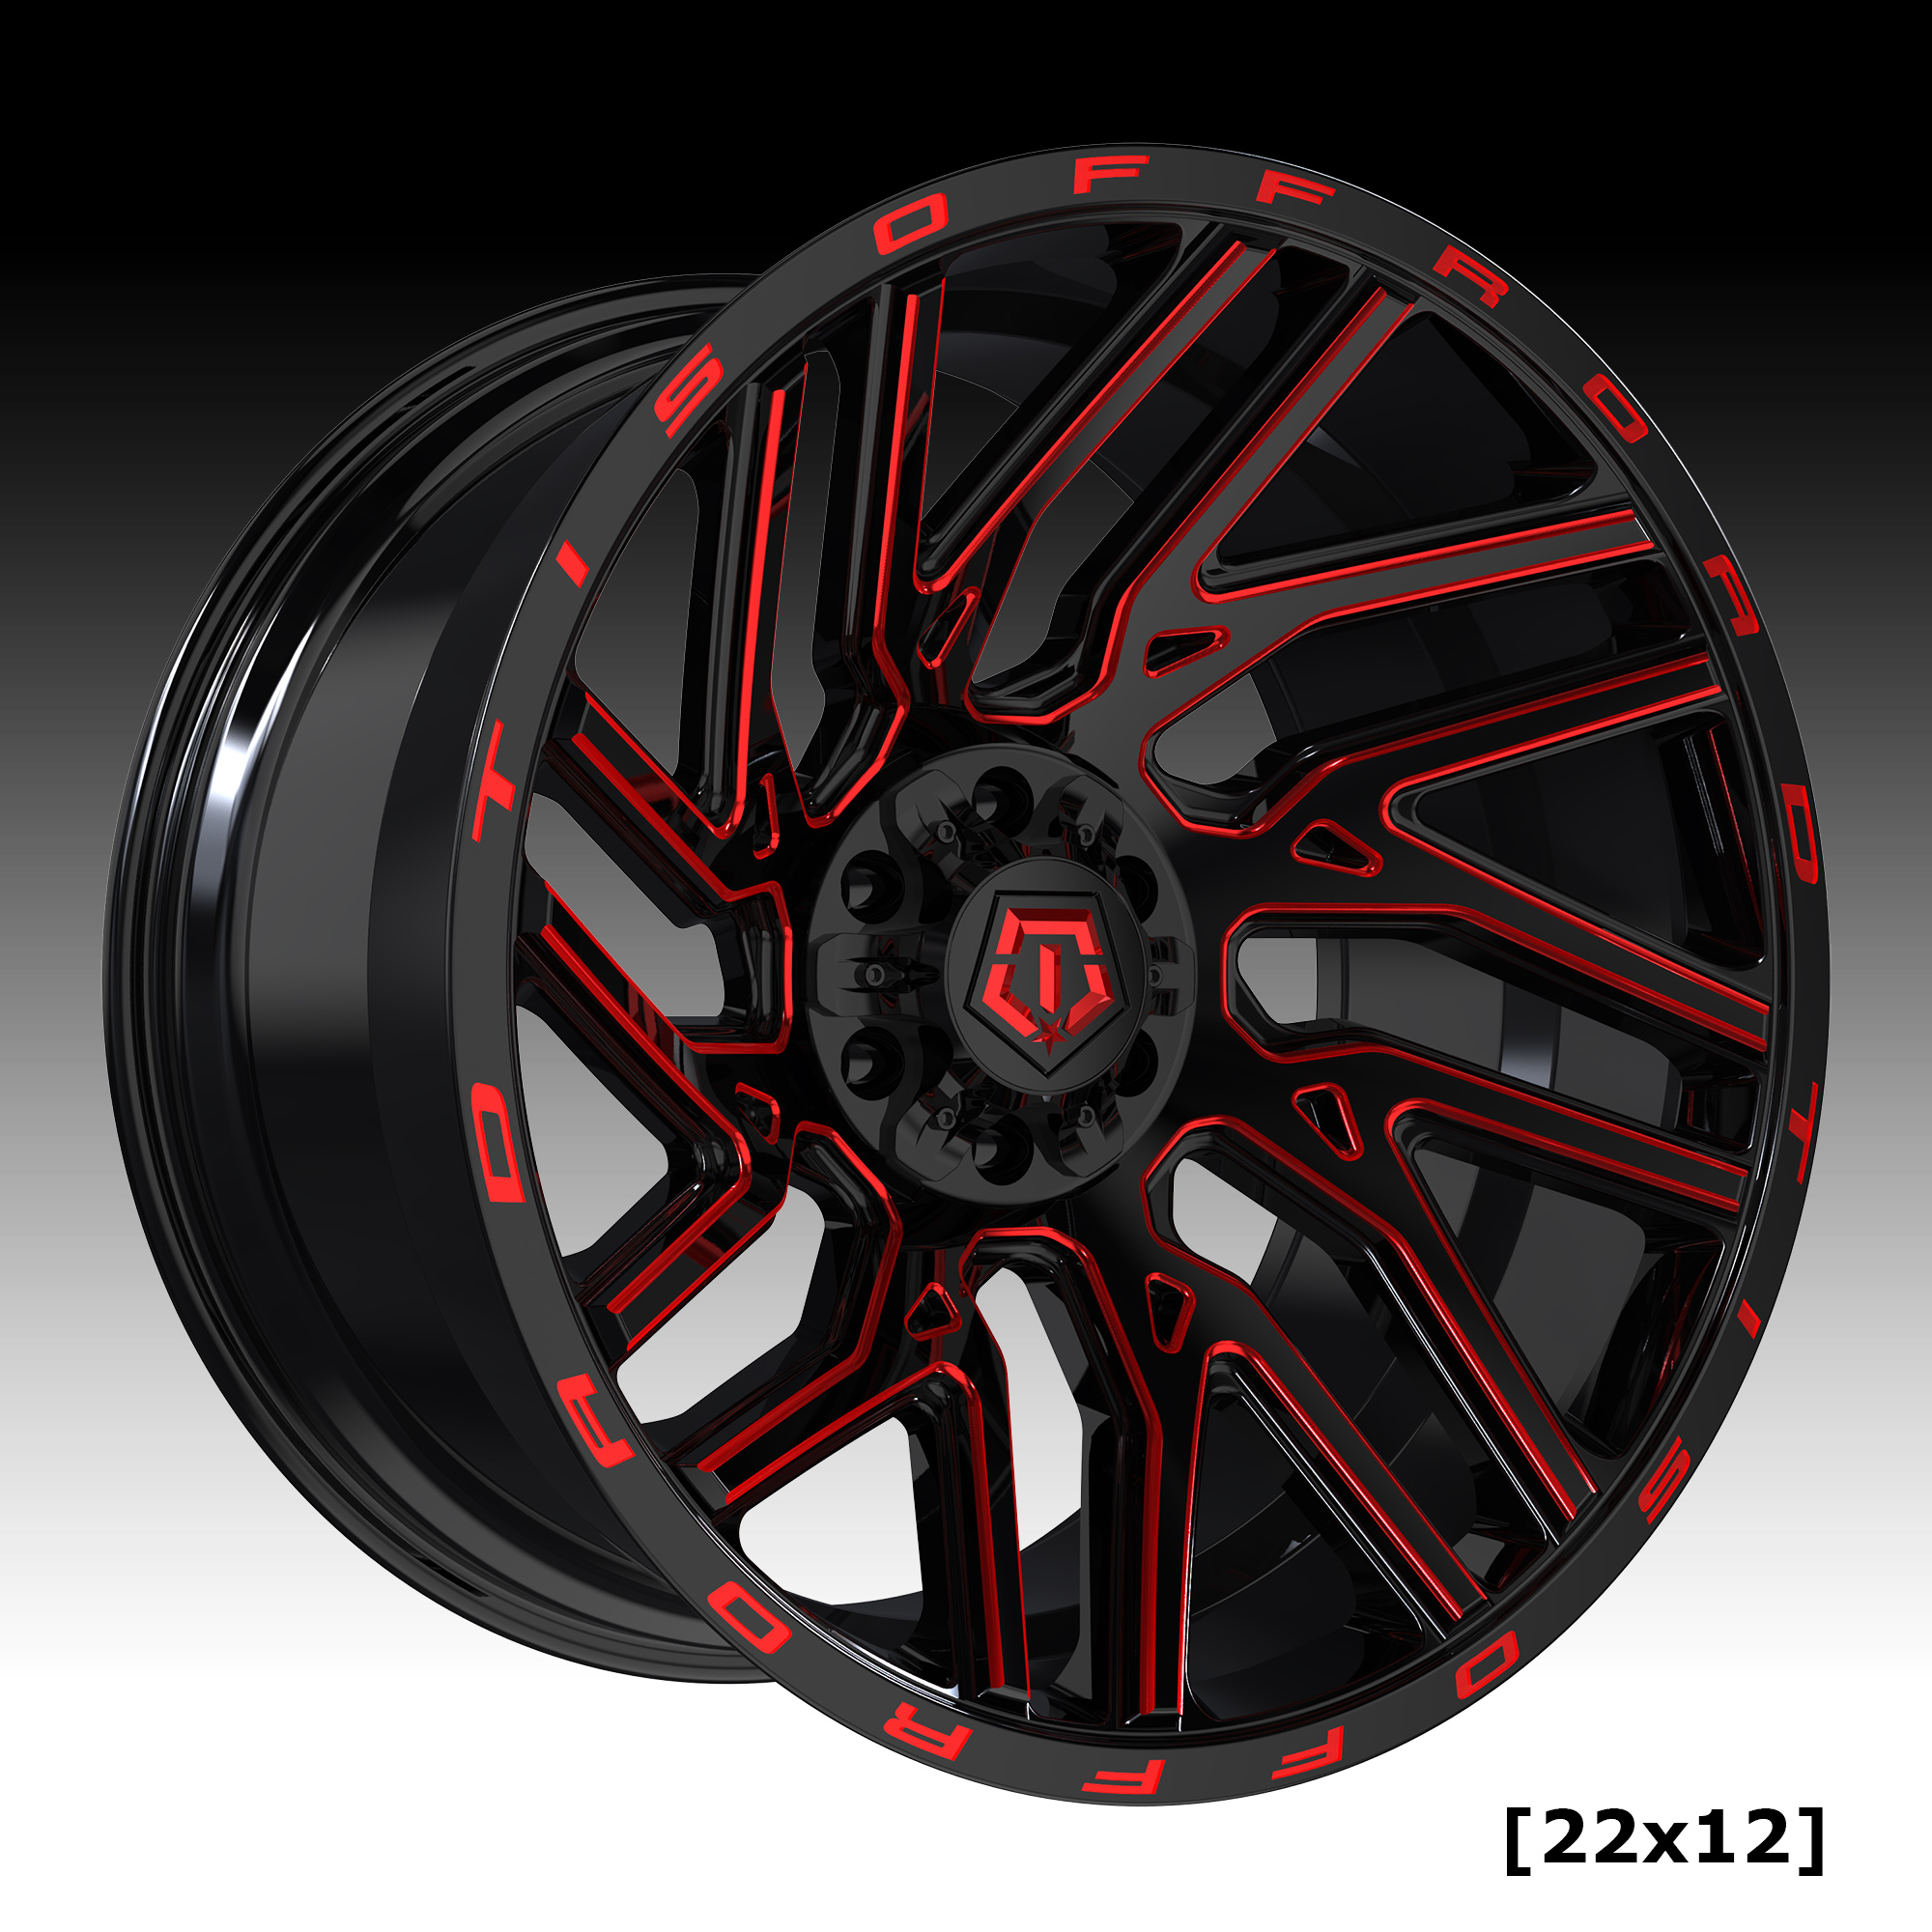 554BMR Gloss Black Red Milled Custom Truck Wheels - 554BMR TIS Custom Wheels Rims - Custom Wheels for Trucks, Jeeps, SUVs and Cars